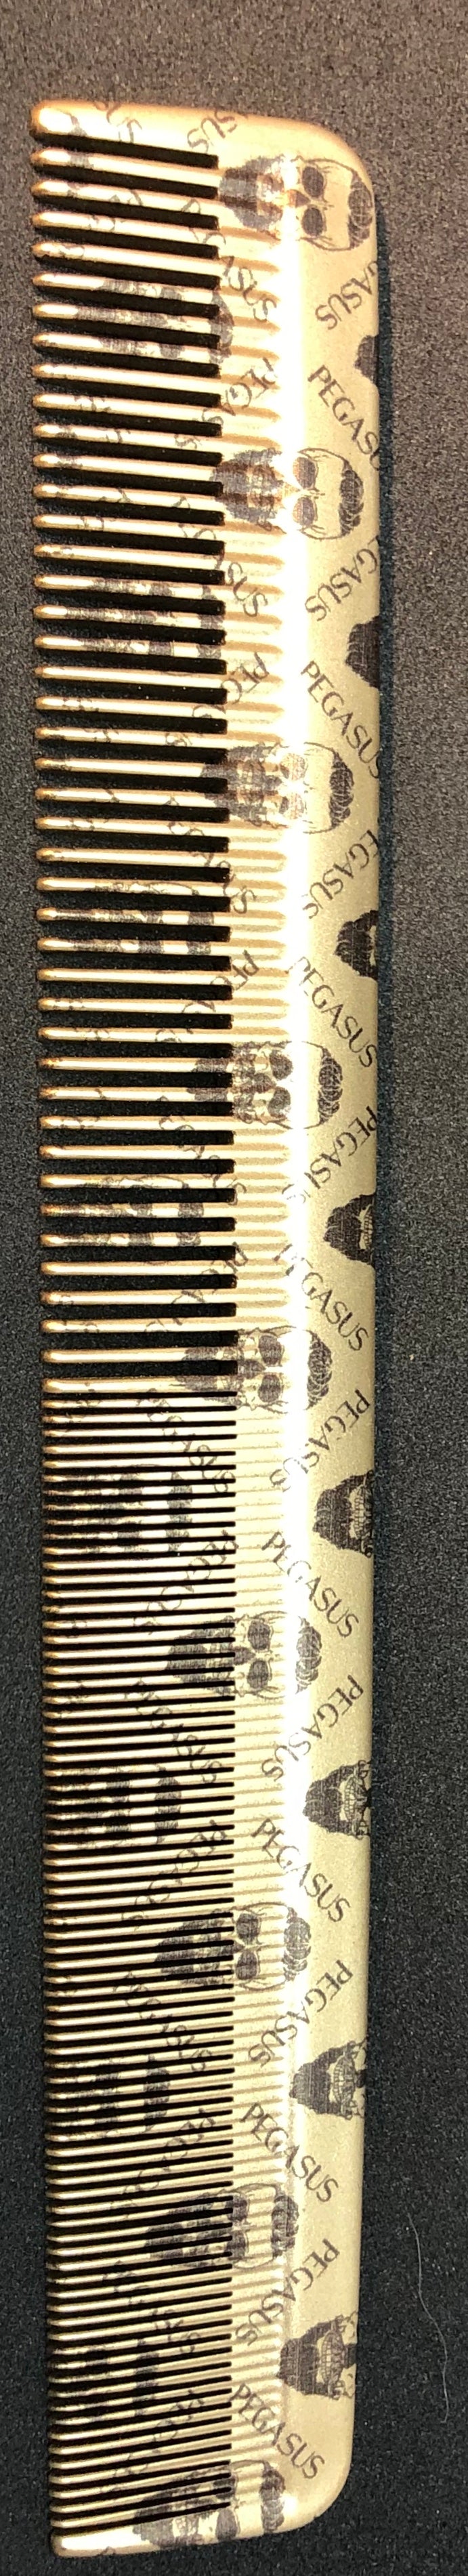 Pegasus 210/42 All Purpose Styling Cutting Comb - Skulleto Silver